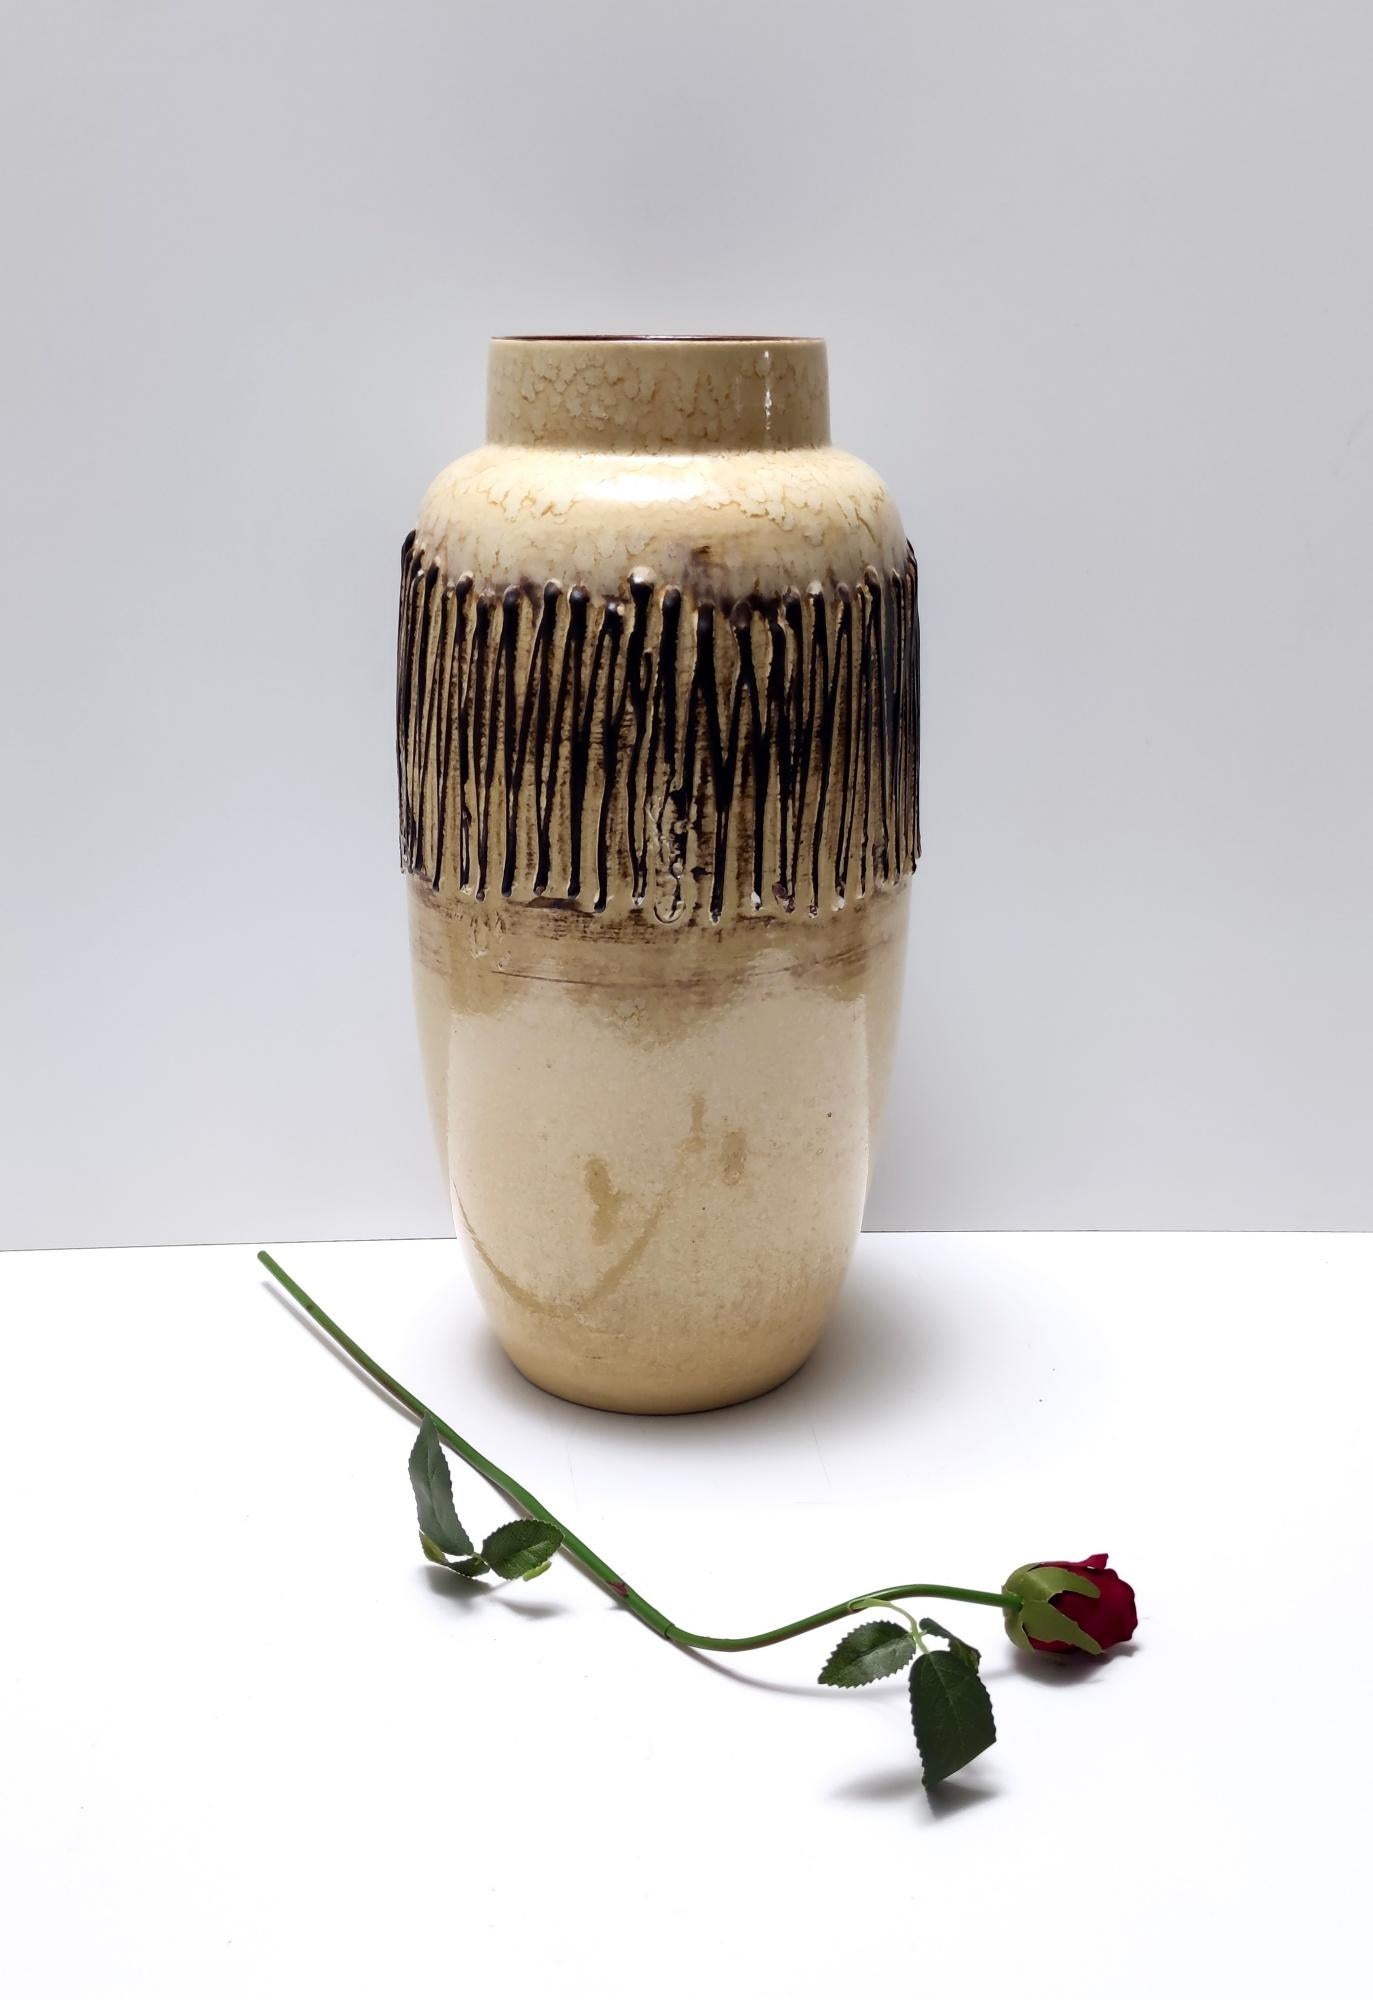 Made in Germany, 1970s. 
This handmade vase is made in glazed ceramic.
It is a vintage piece, therefore it might show slight traces of use, but it can be considered as in very good original condition and ready to become a piece in a home.

Measure: